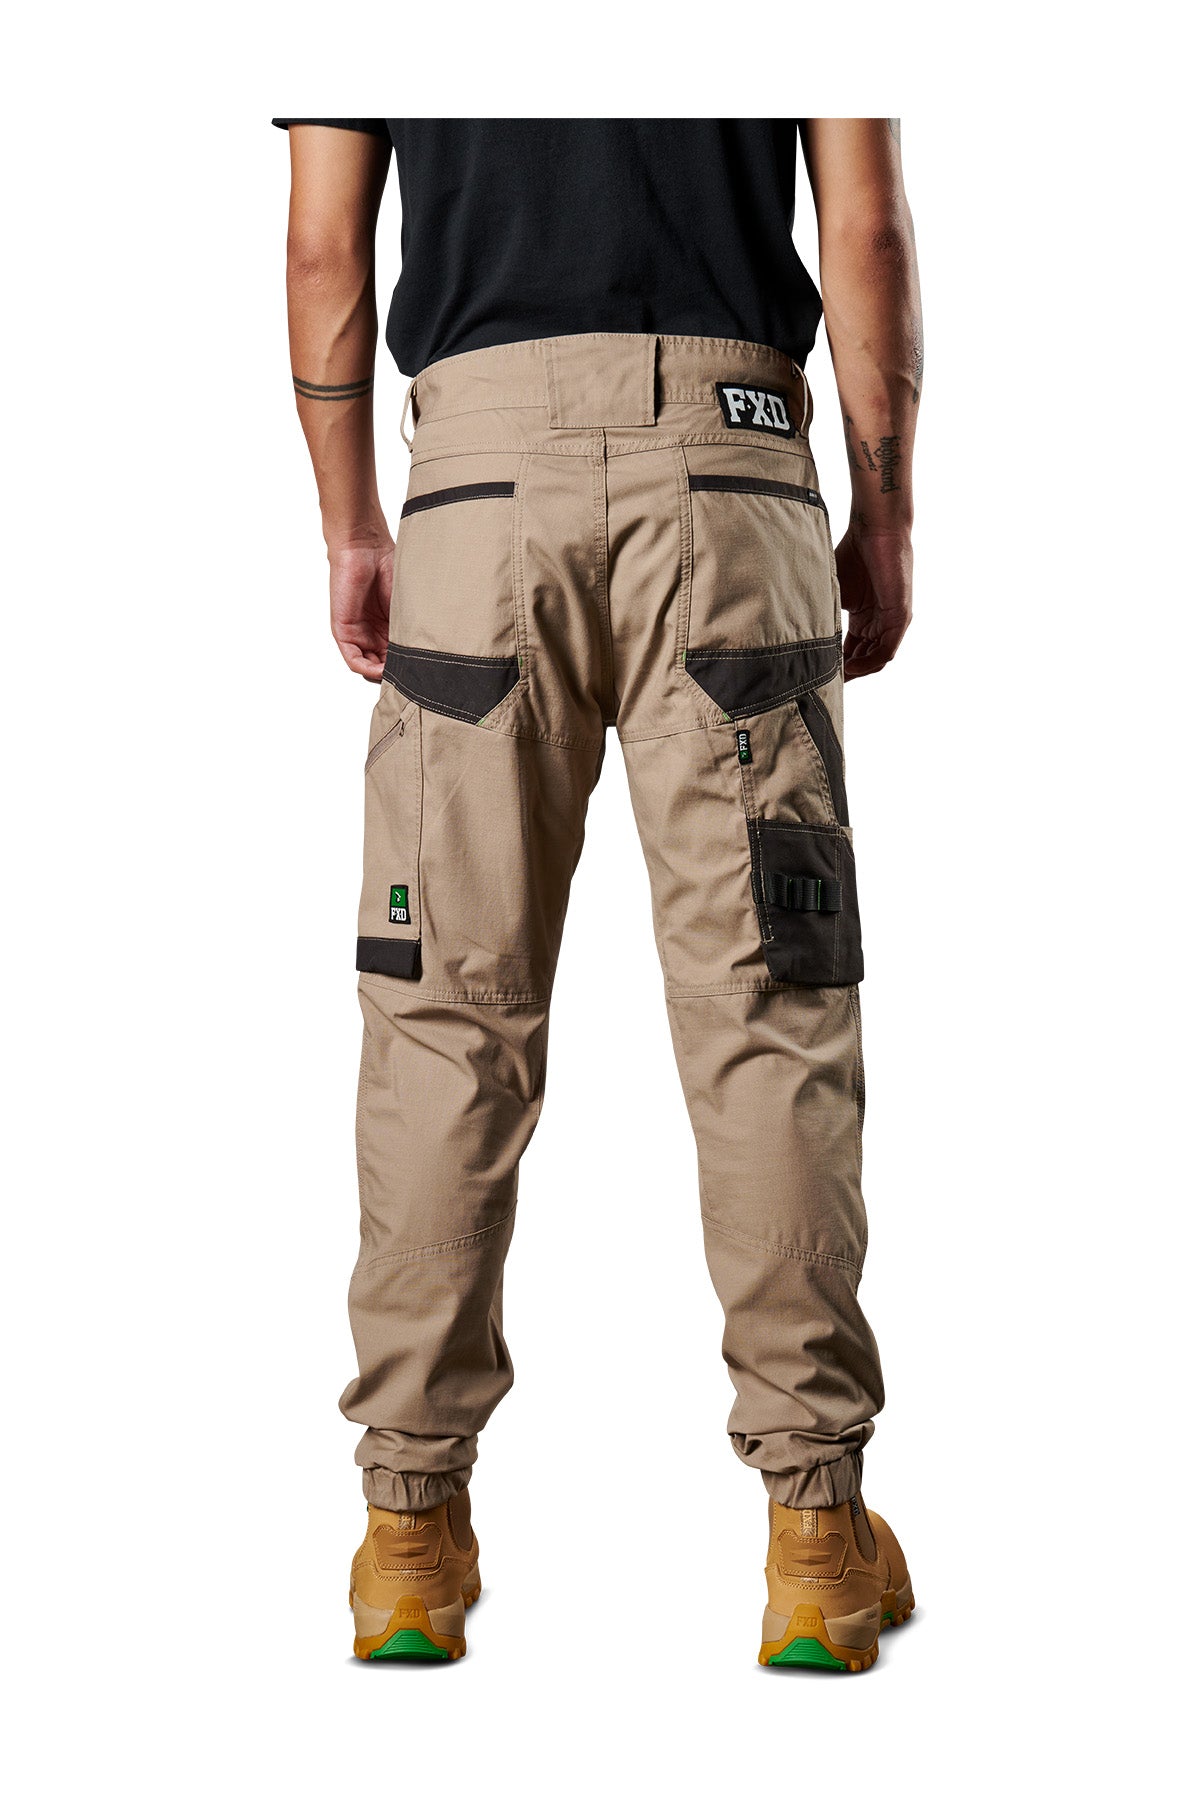 FXD WP-11 Mens Ripstop Cuffed Work Pant